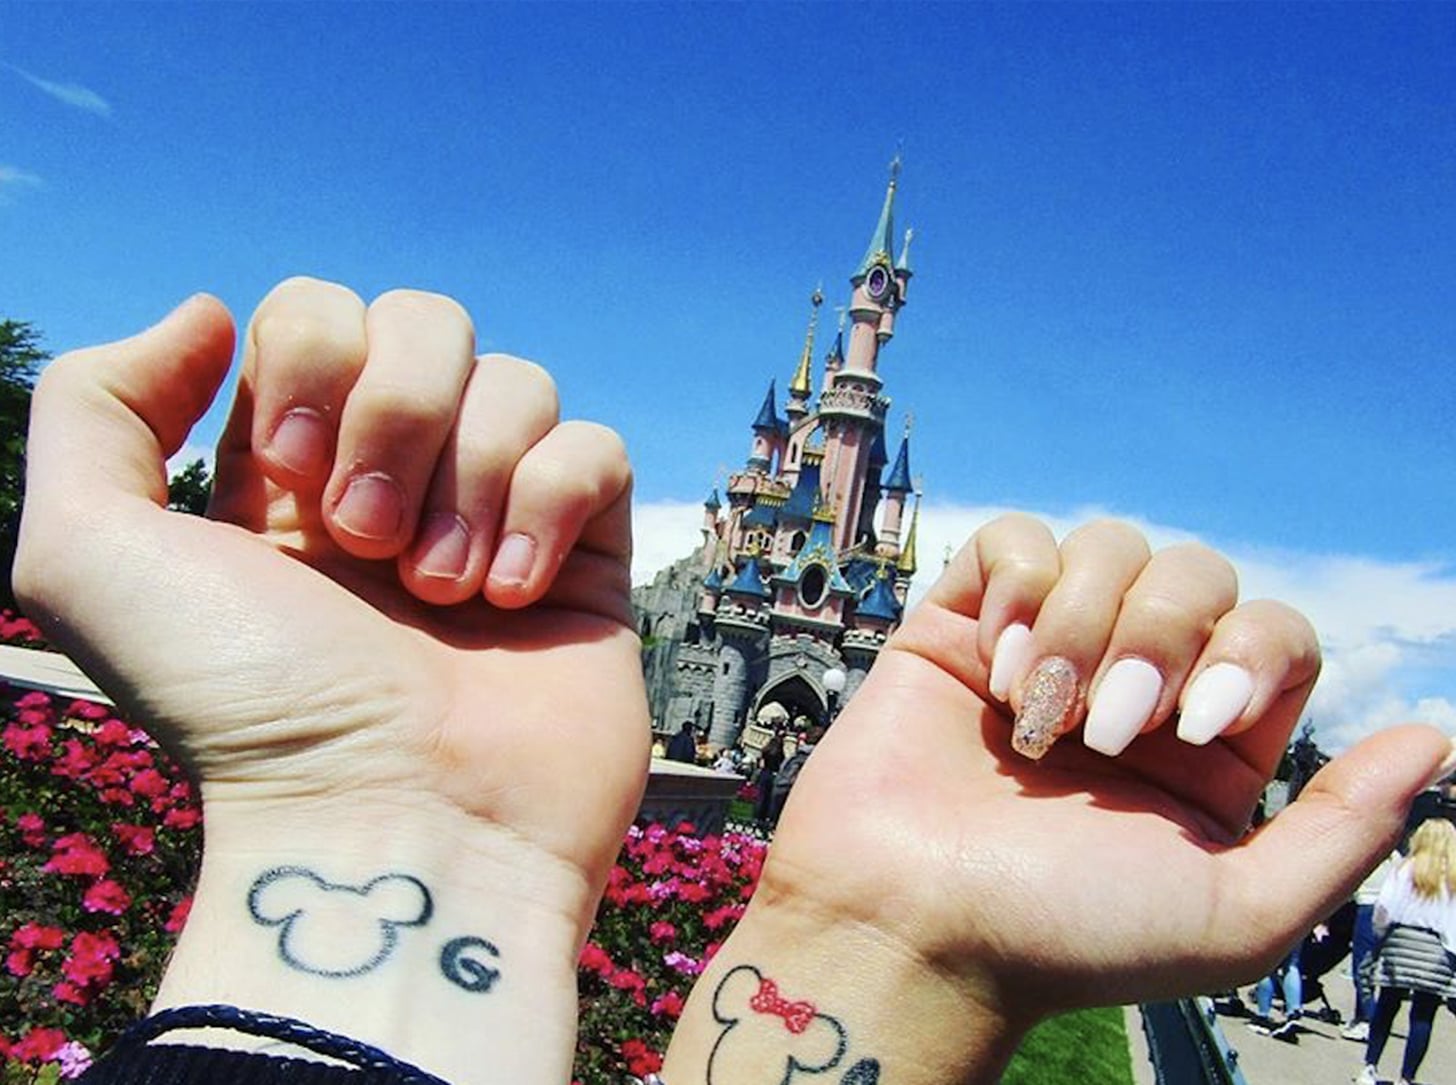 mickey mouse ears tattoo